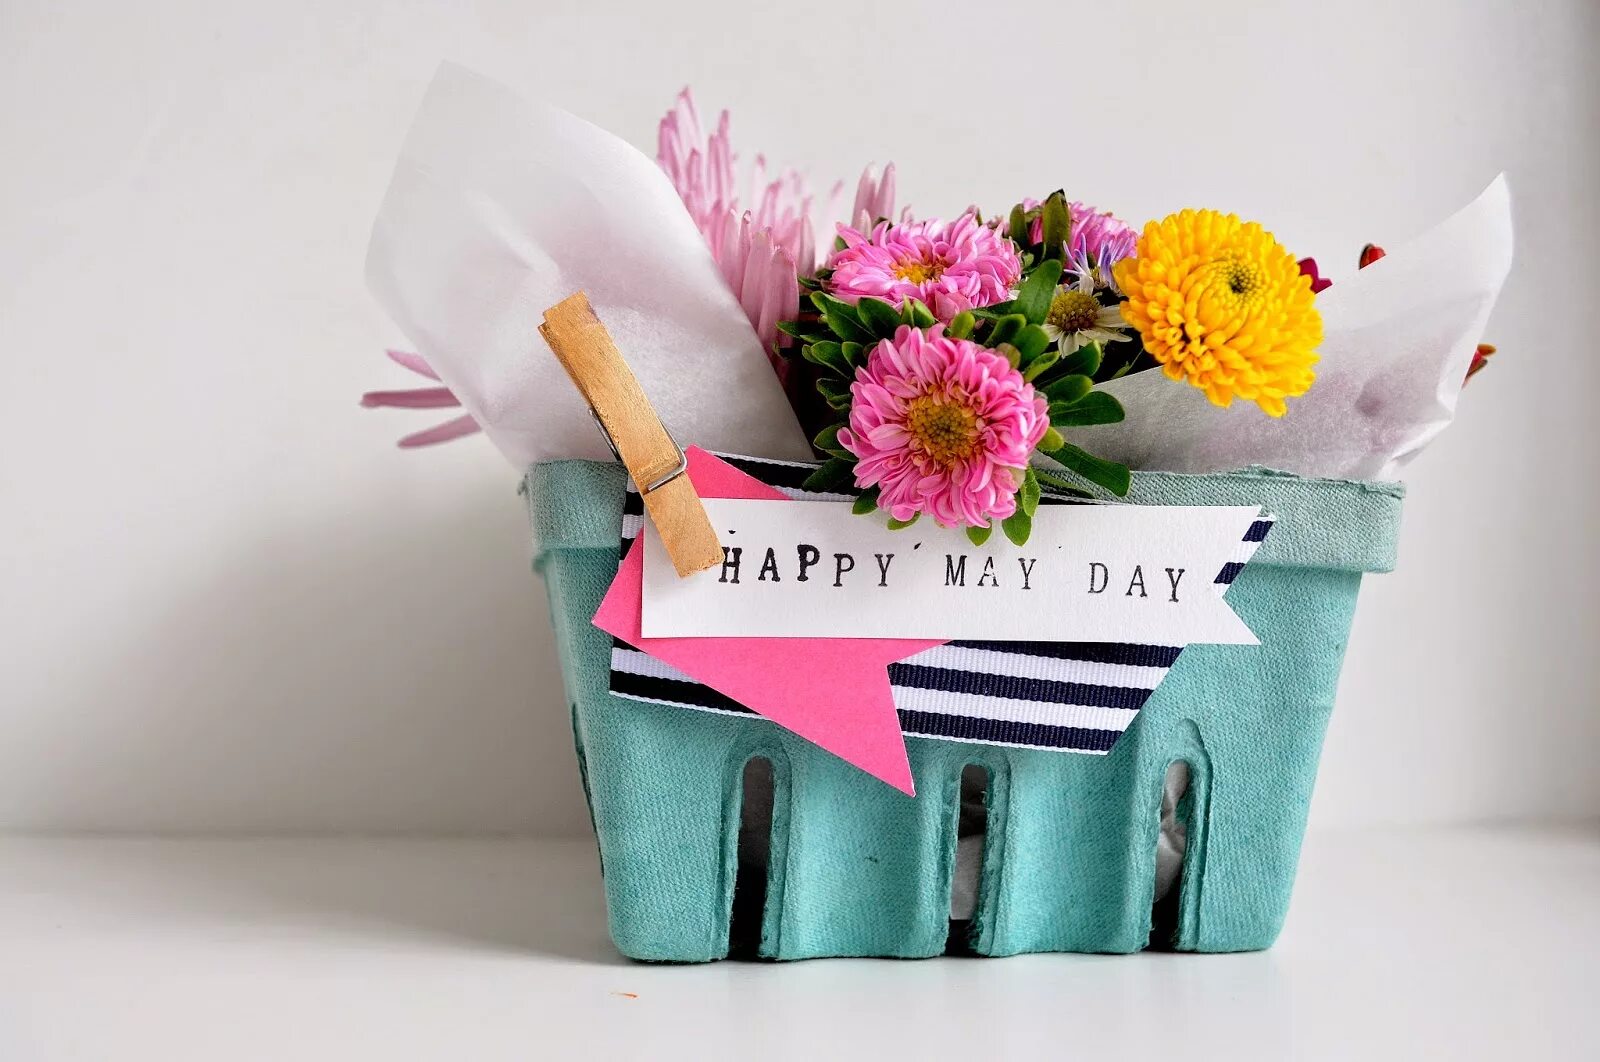 Happy may day. May Baskets. Flower Bouquets for May Day. Flower Basket for Craft.